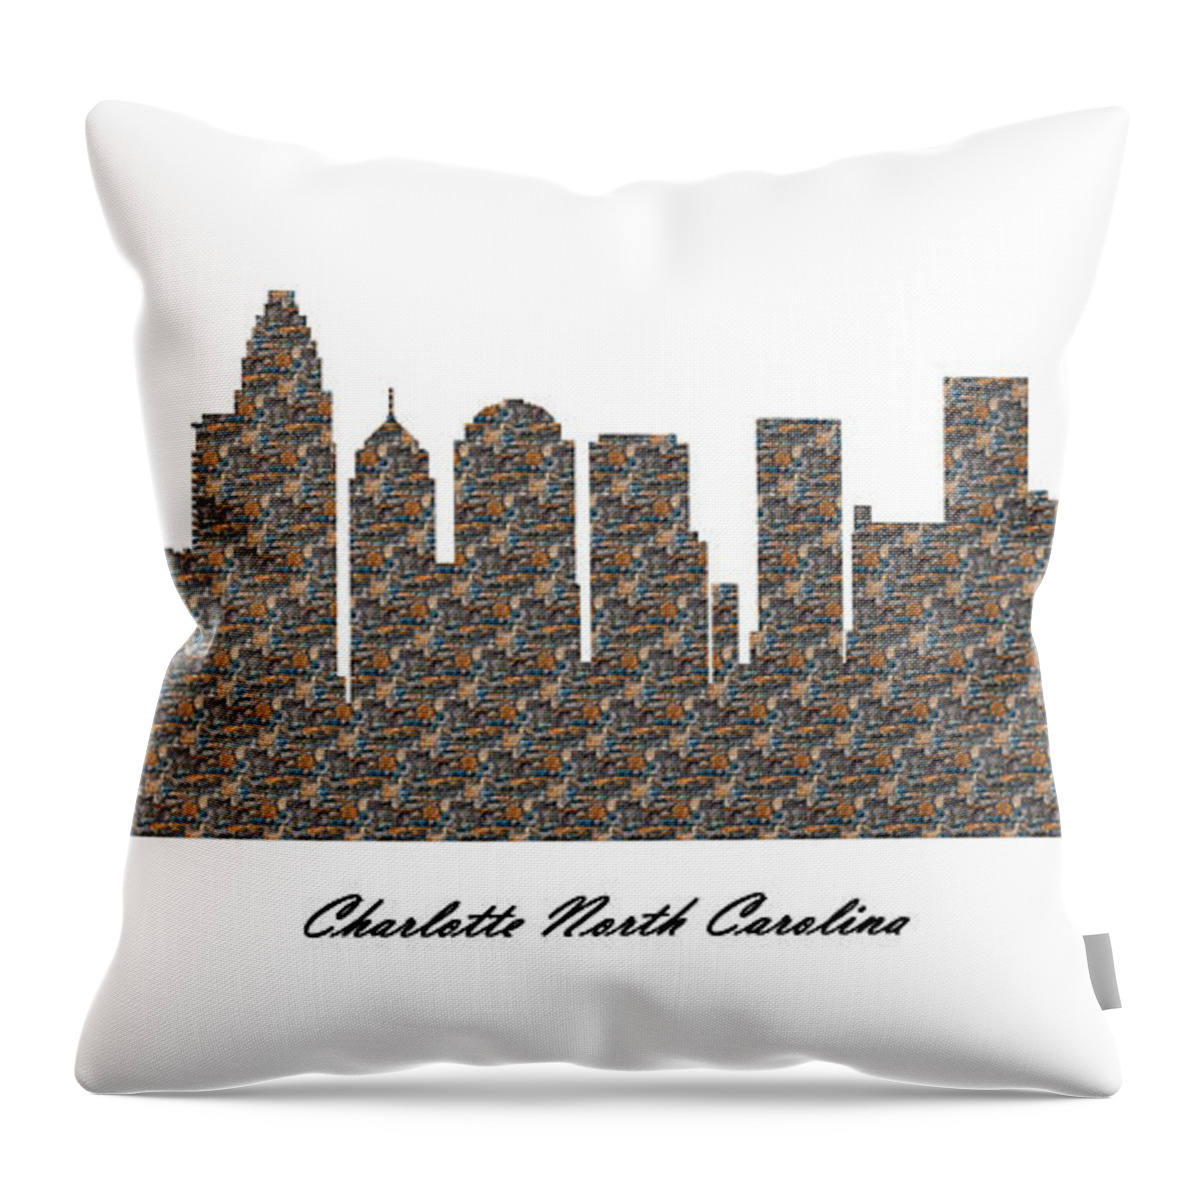 Fine Art Throw Pillow featuring the digital art Charlotte North Carolina 3D Stone Wall Skyline by Gregory Murray